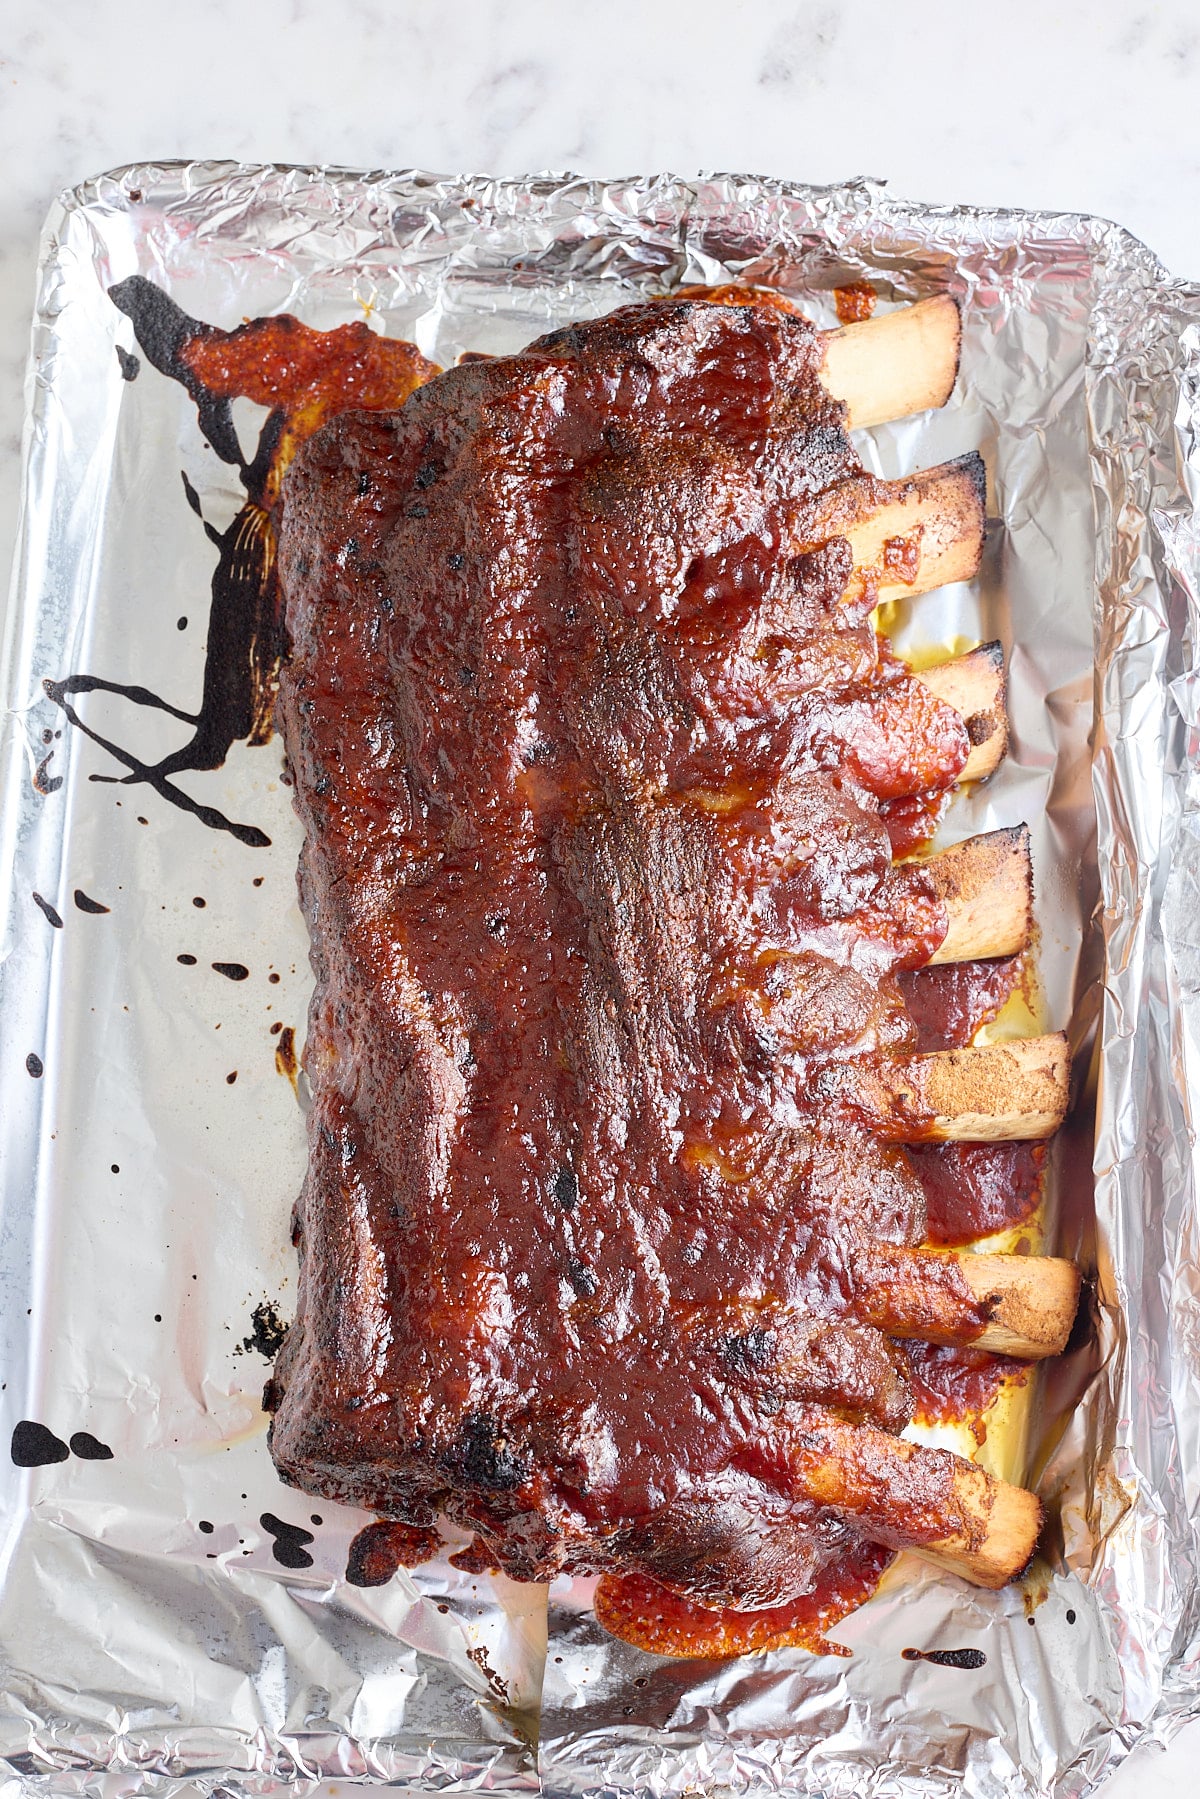 Beef Ribs Coated in BBQ Sauce